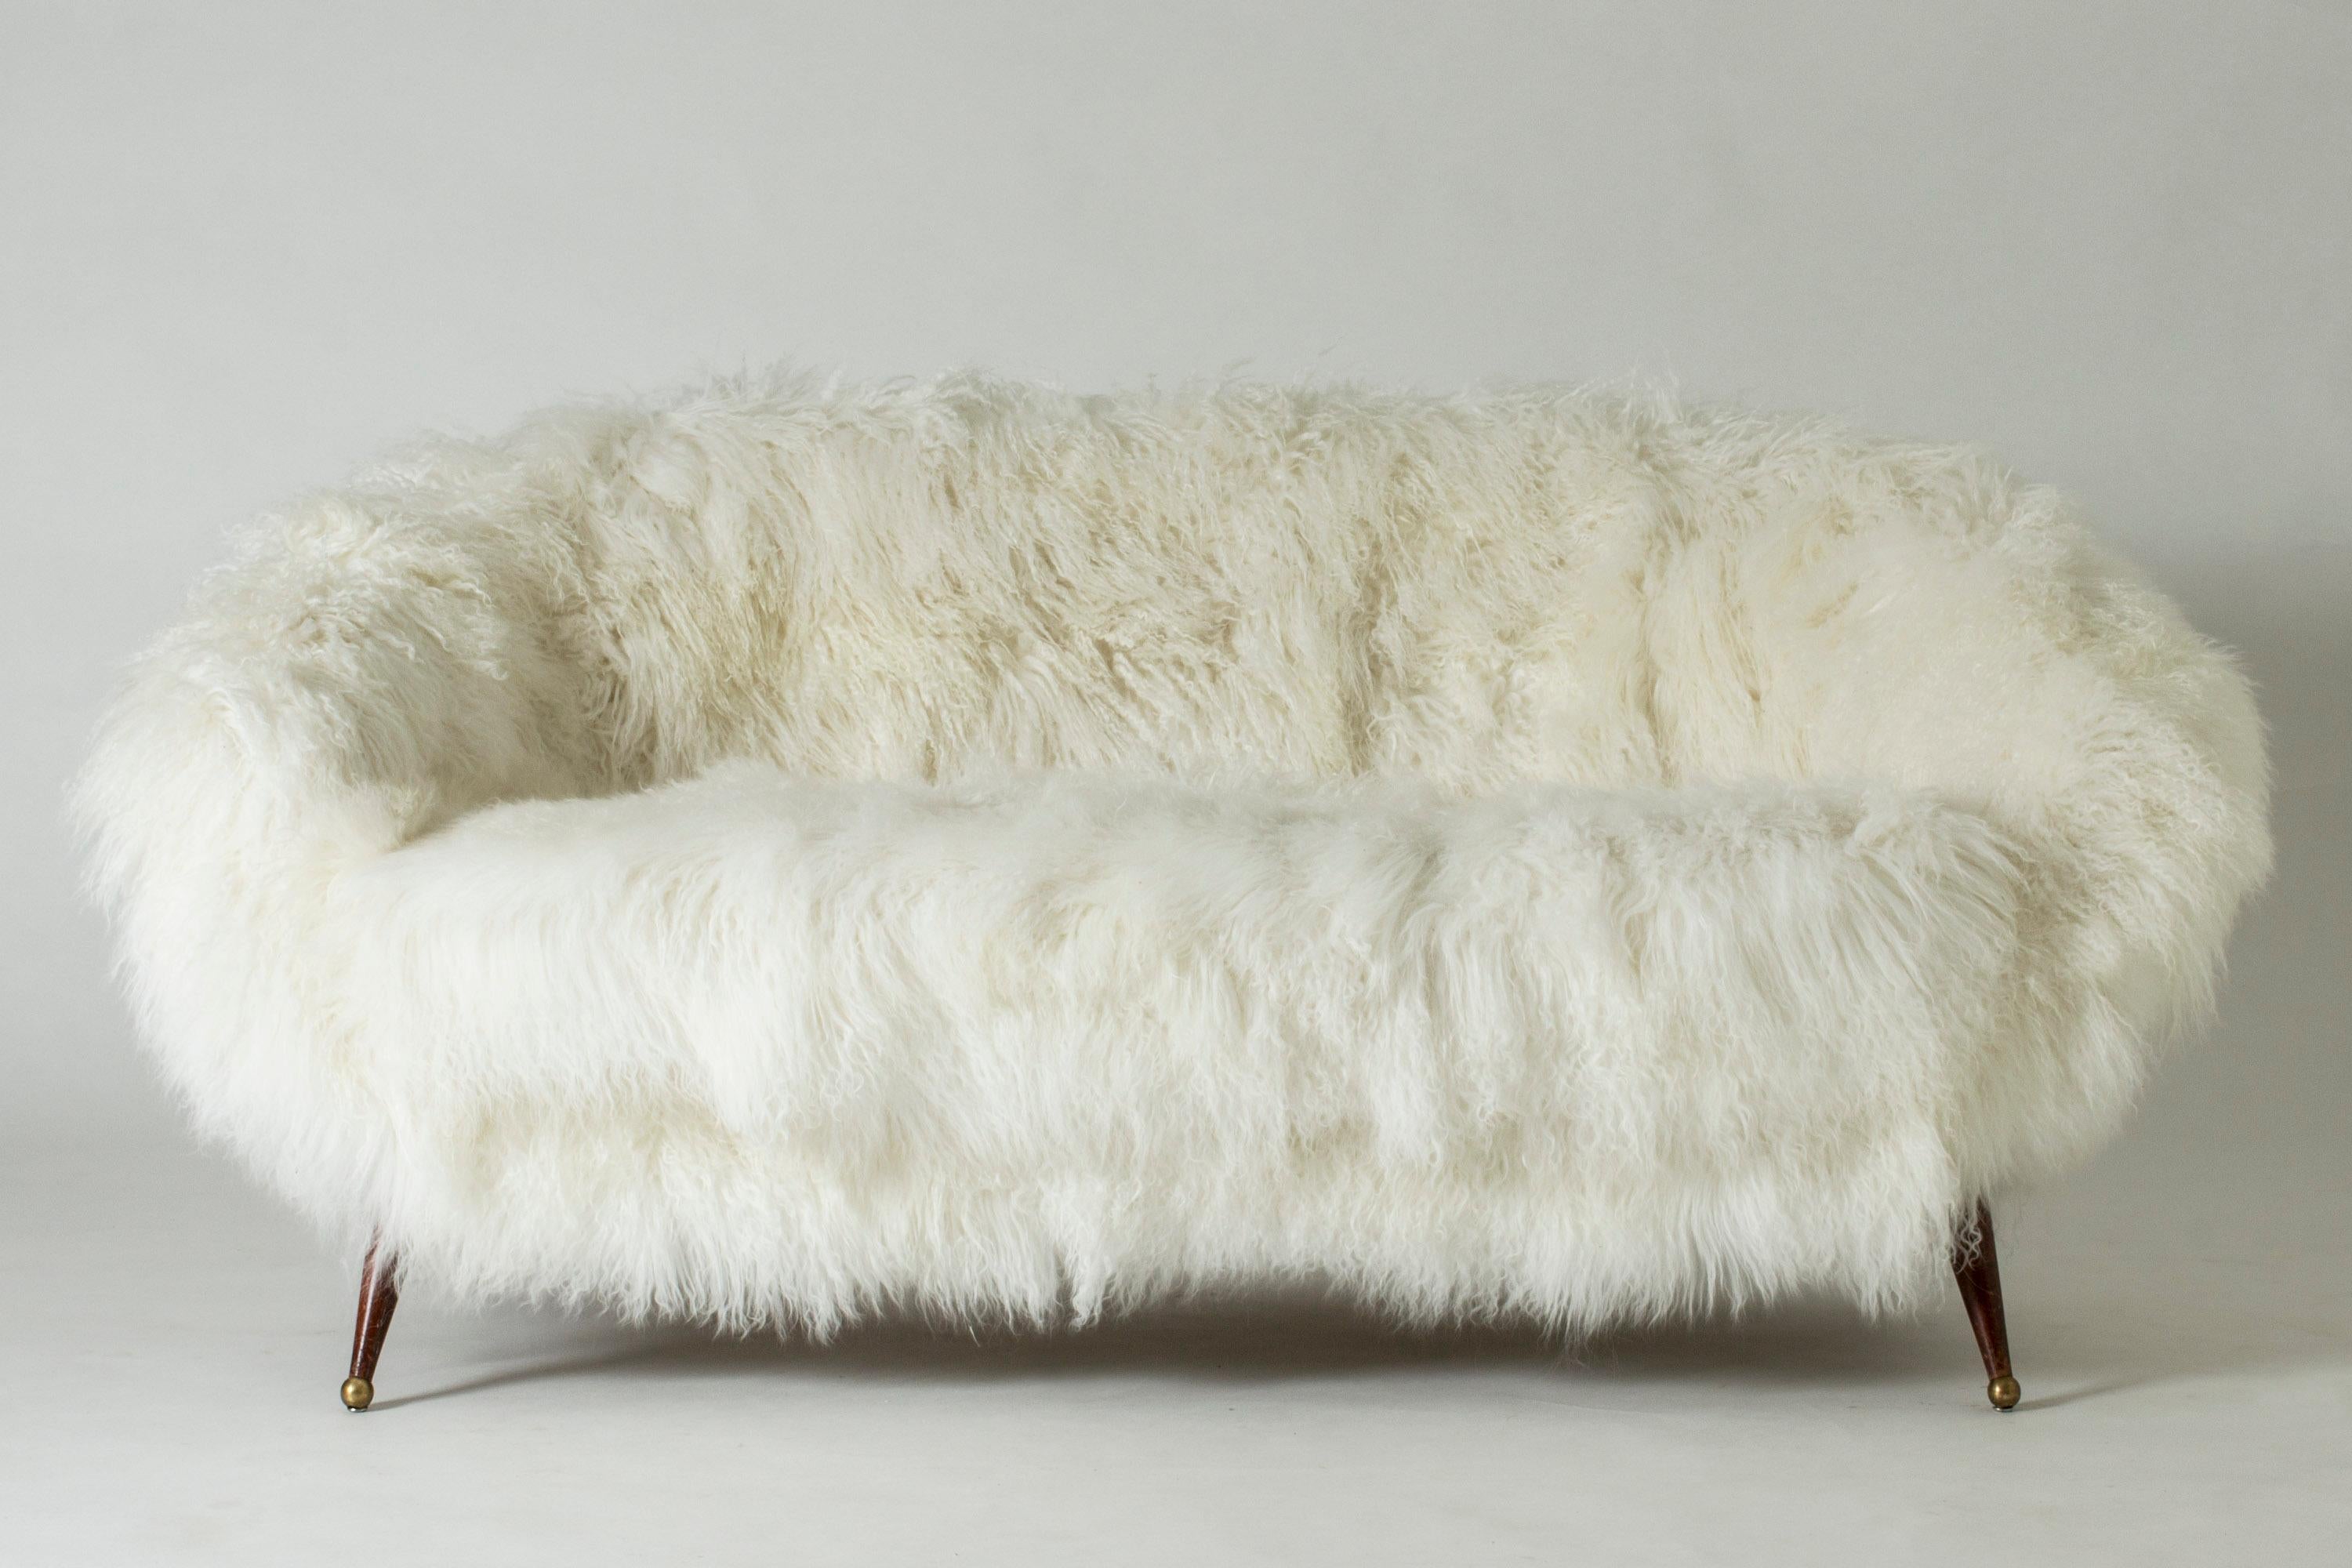 Stunning “Tellus” sofa by Folke Jansson, upholstered with white, Tibetan sheepskin. Rounded, wide and low design with slender legs with brass balls as feet.